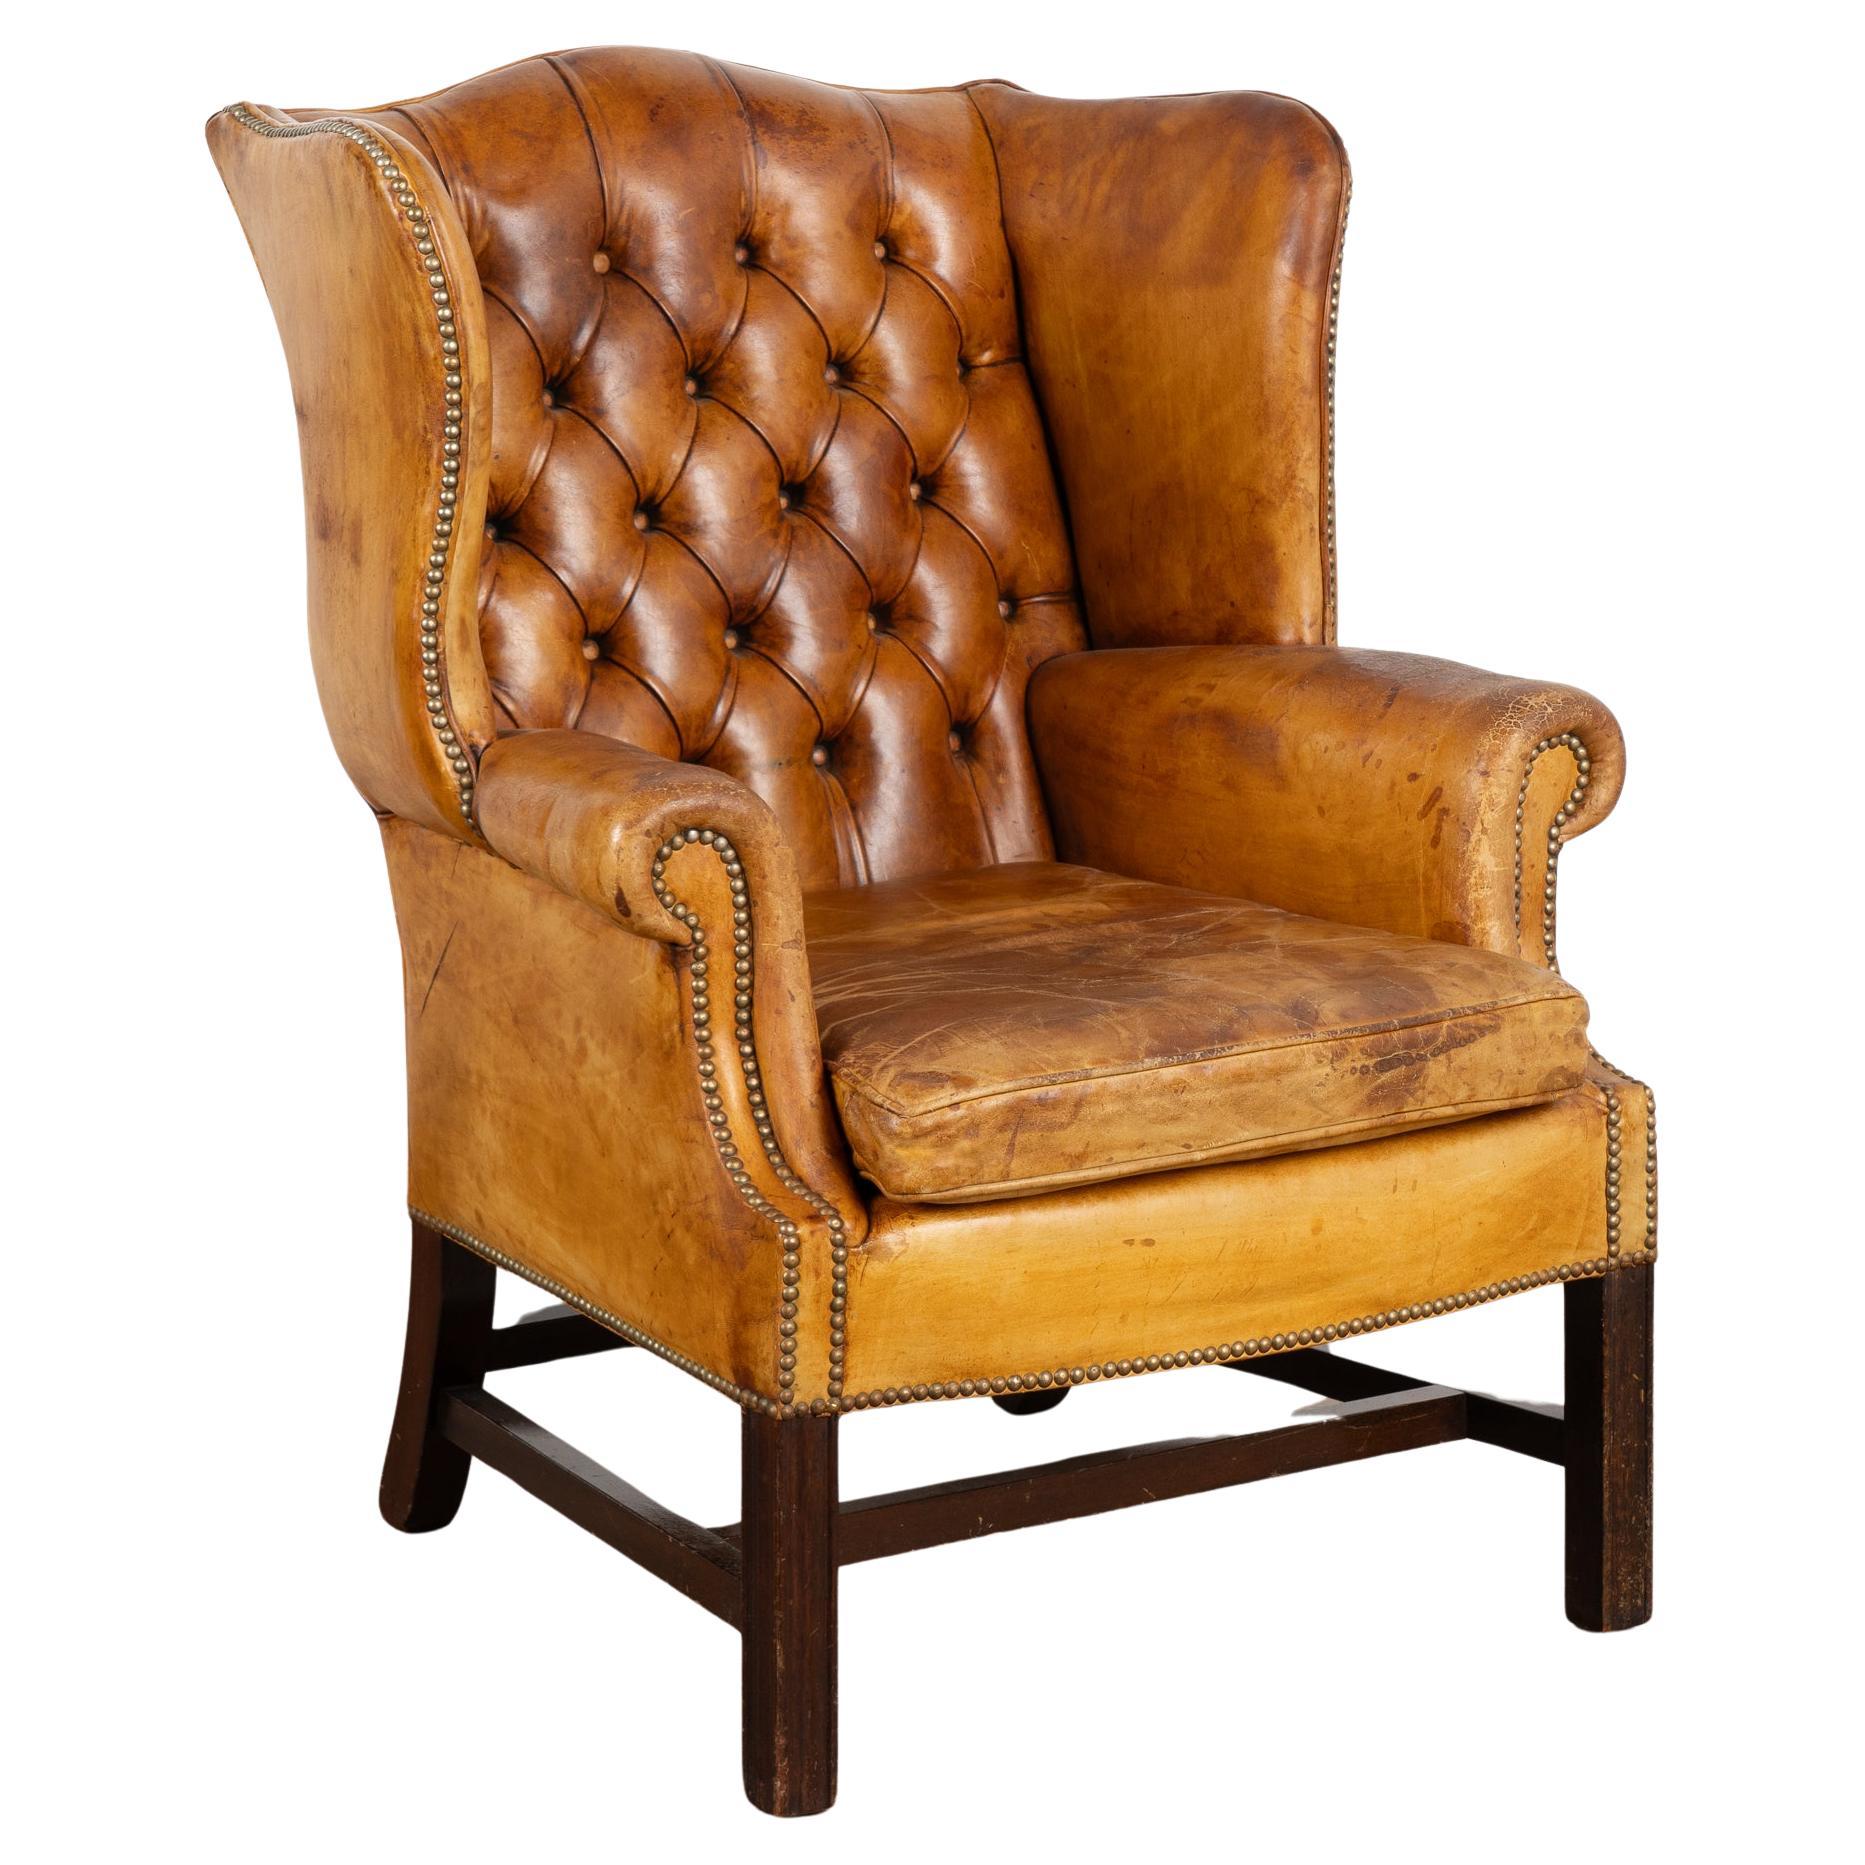 Vintage Brown Leather Wingback Chesterfield Arm Chair, England circa 1940